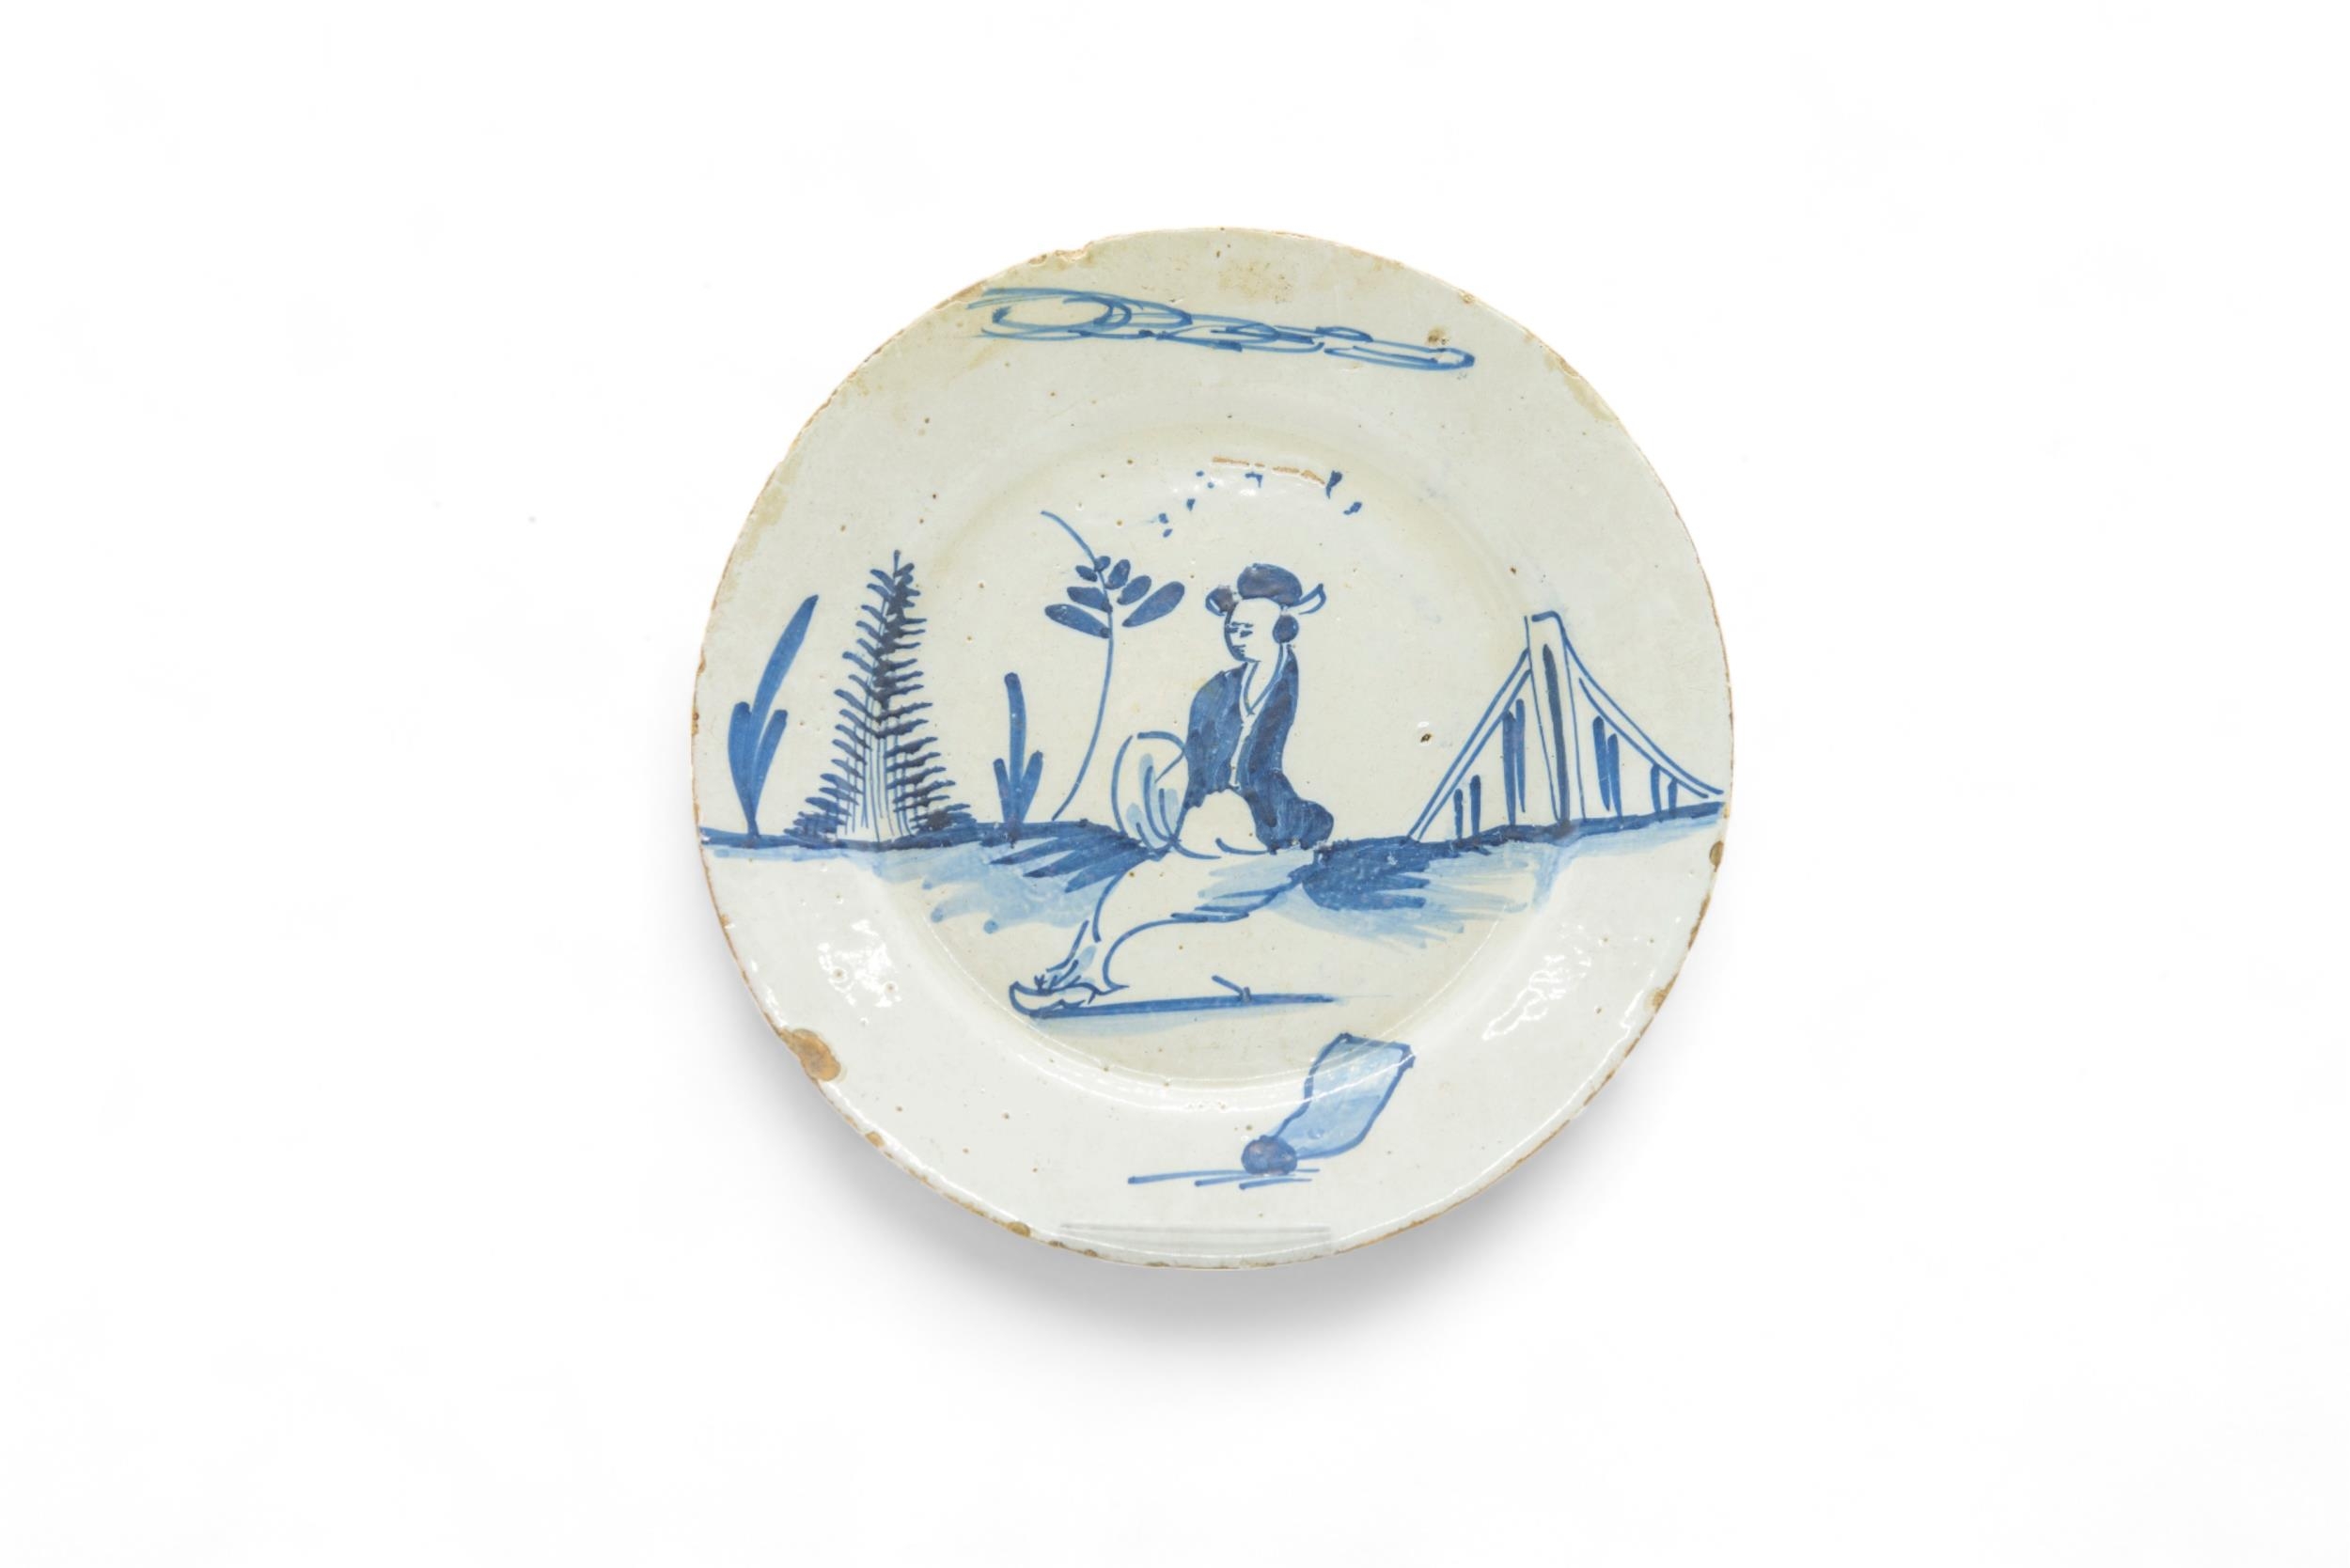 TEN DELFT PLATES 18th Century, including two with bianco sopro bianco decoration and one with a - Image 4 of 10